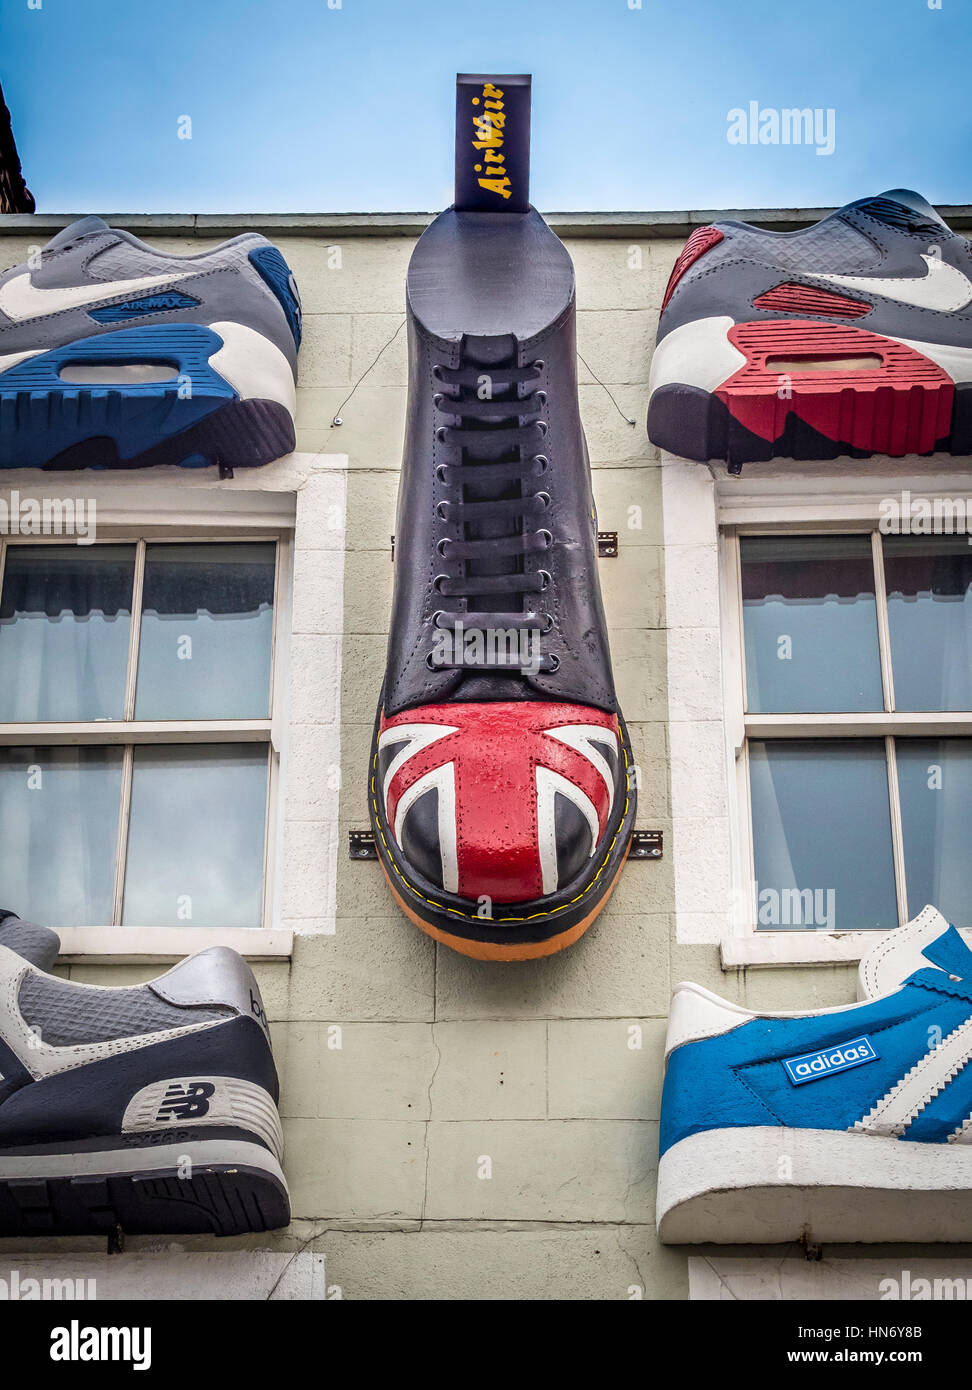 Large shoes on outside of shop in Camden Town centre, London UK. Stock Photo